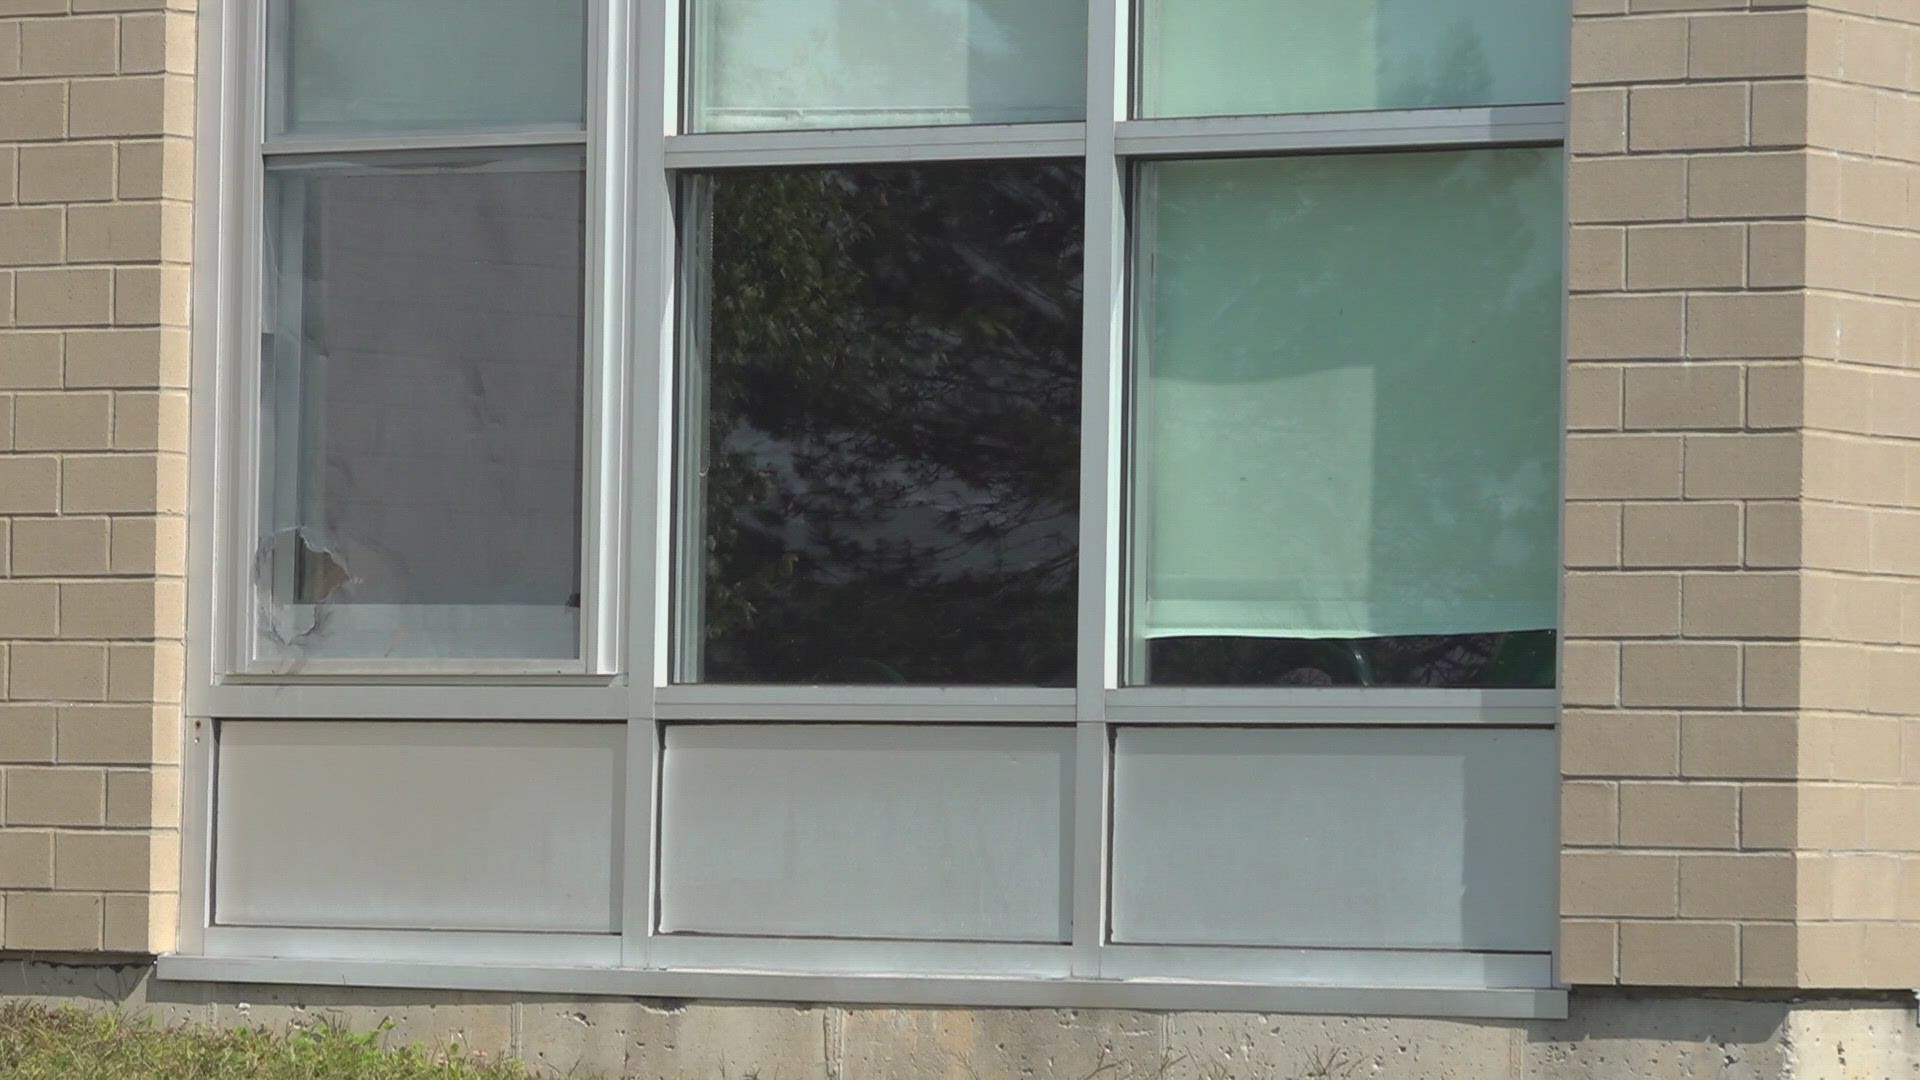 Students at Talbot Community School won't start classes until Friday due to a mold outbreak.